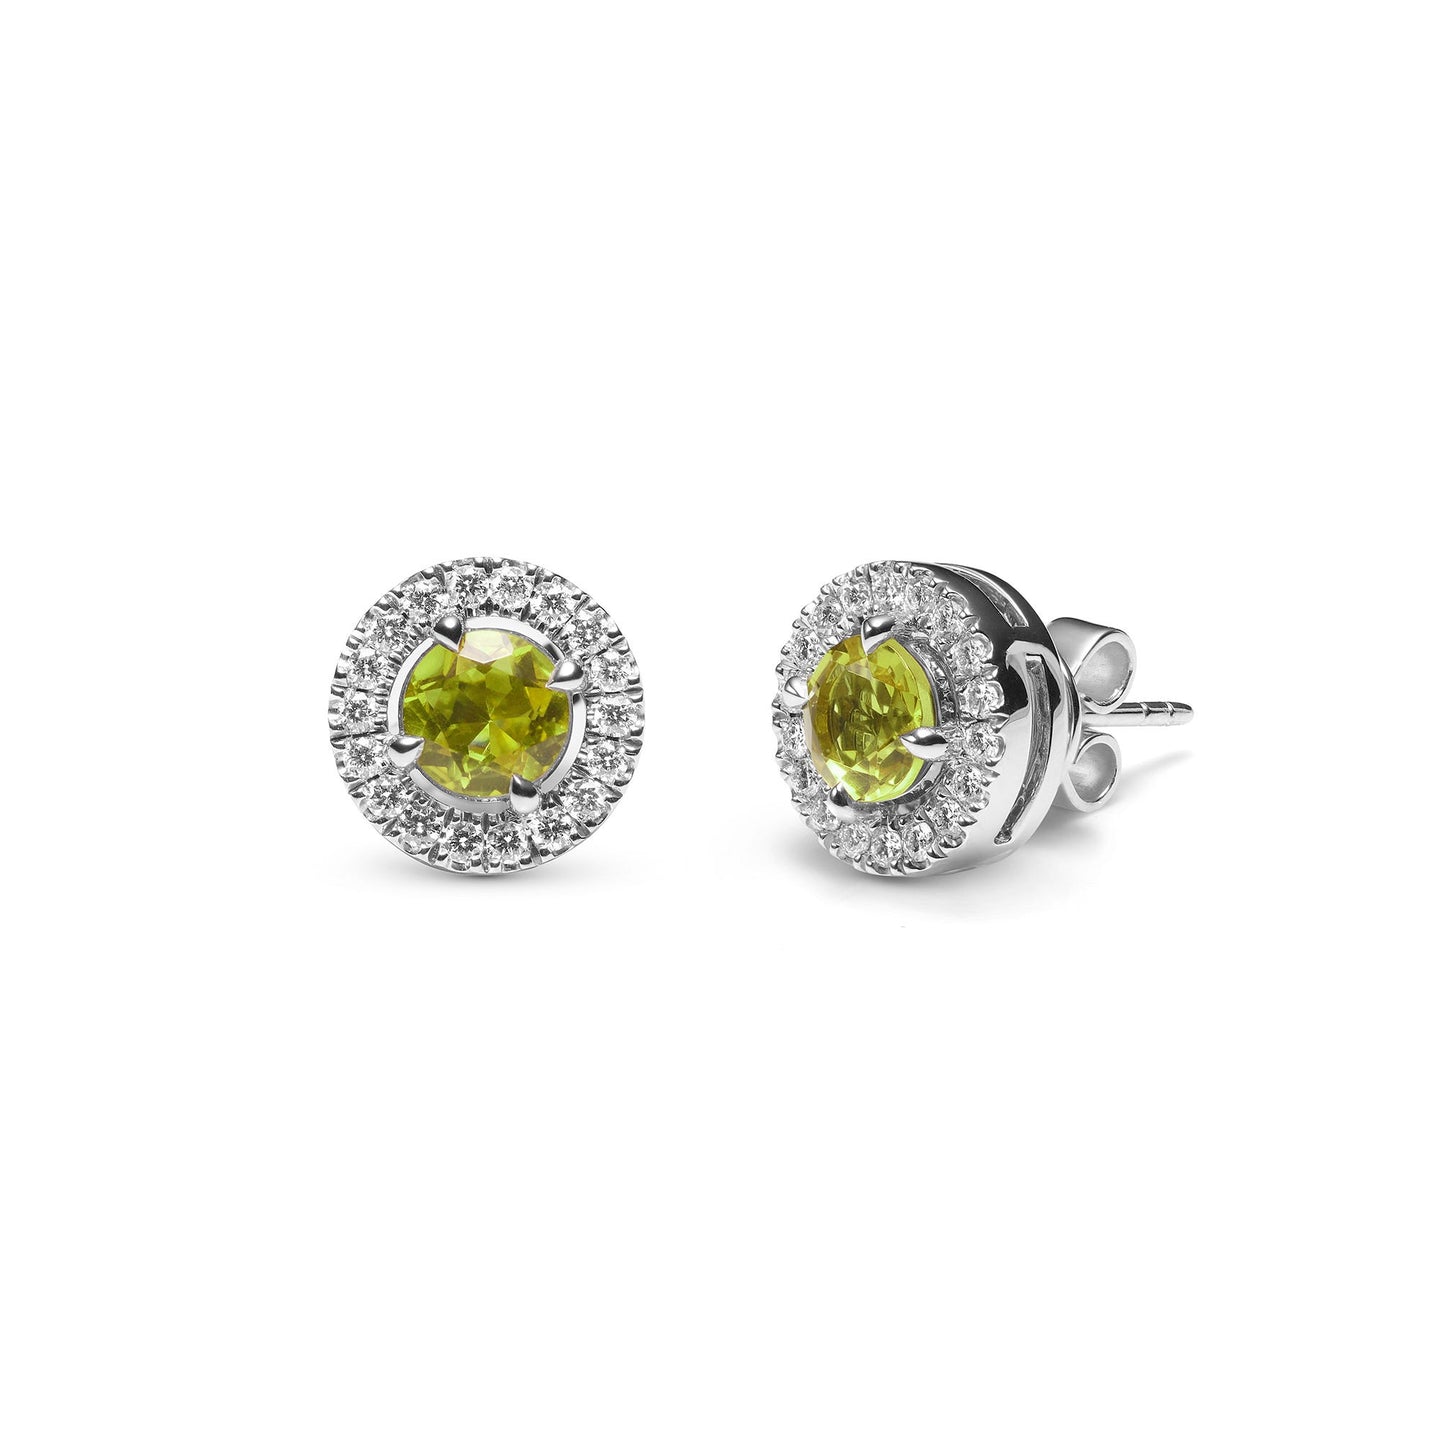 Platinum Earrings with Green Peridot and Diamonds